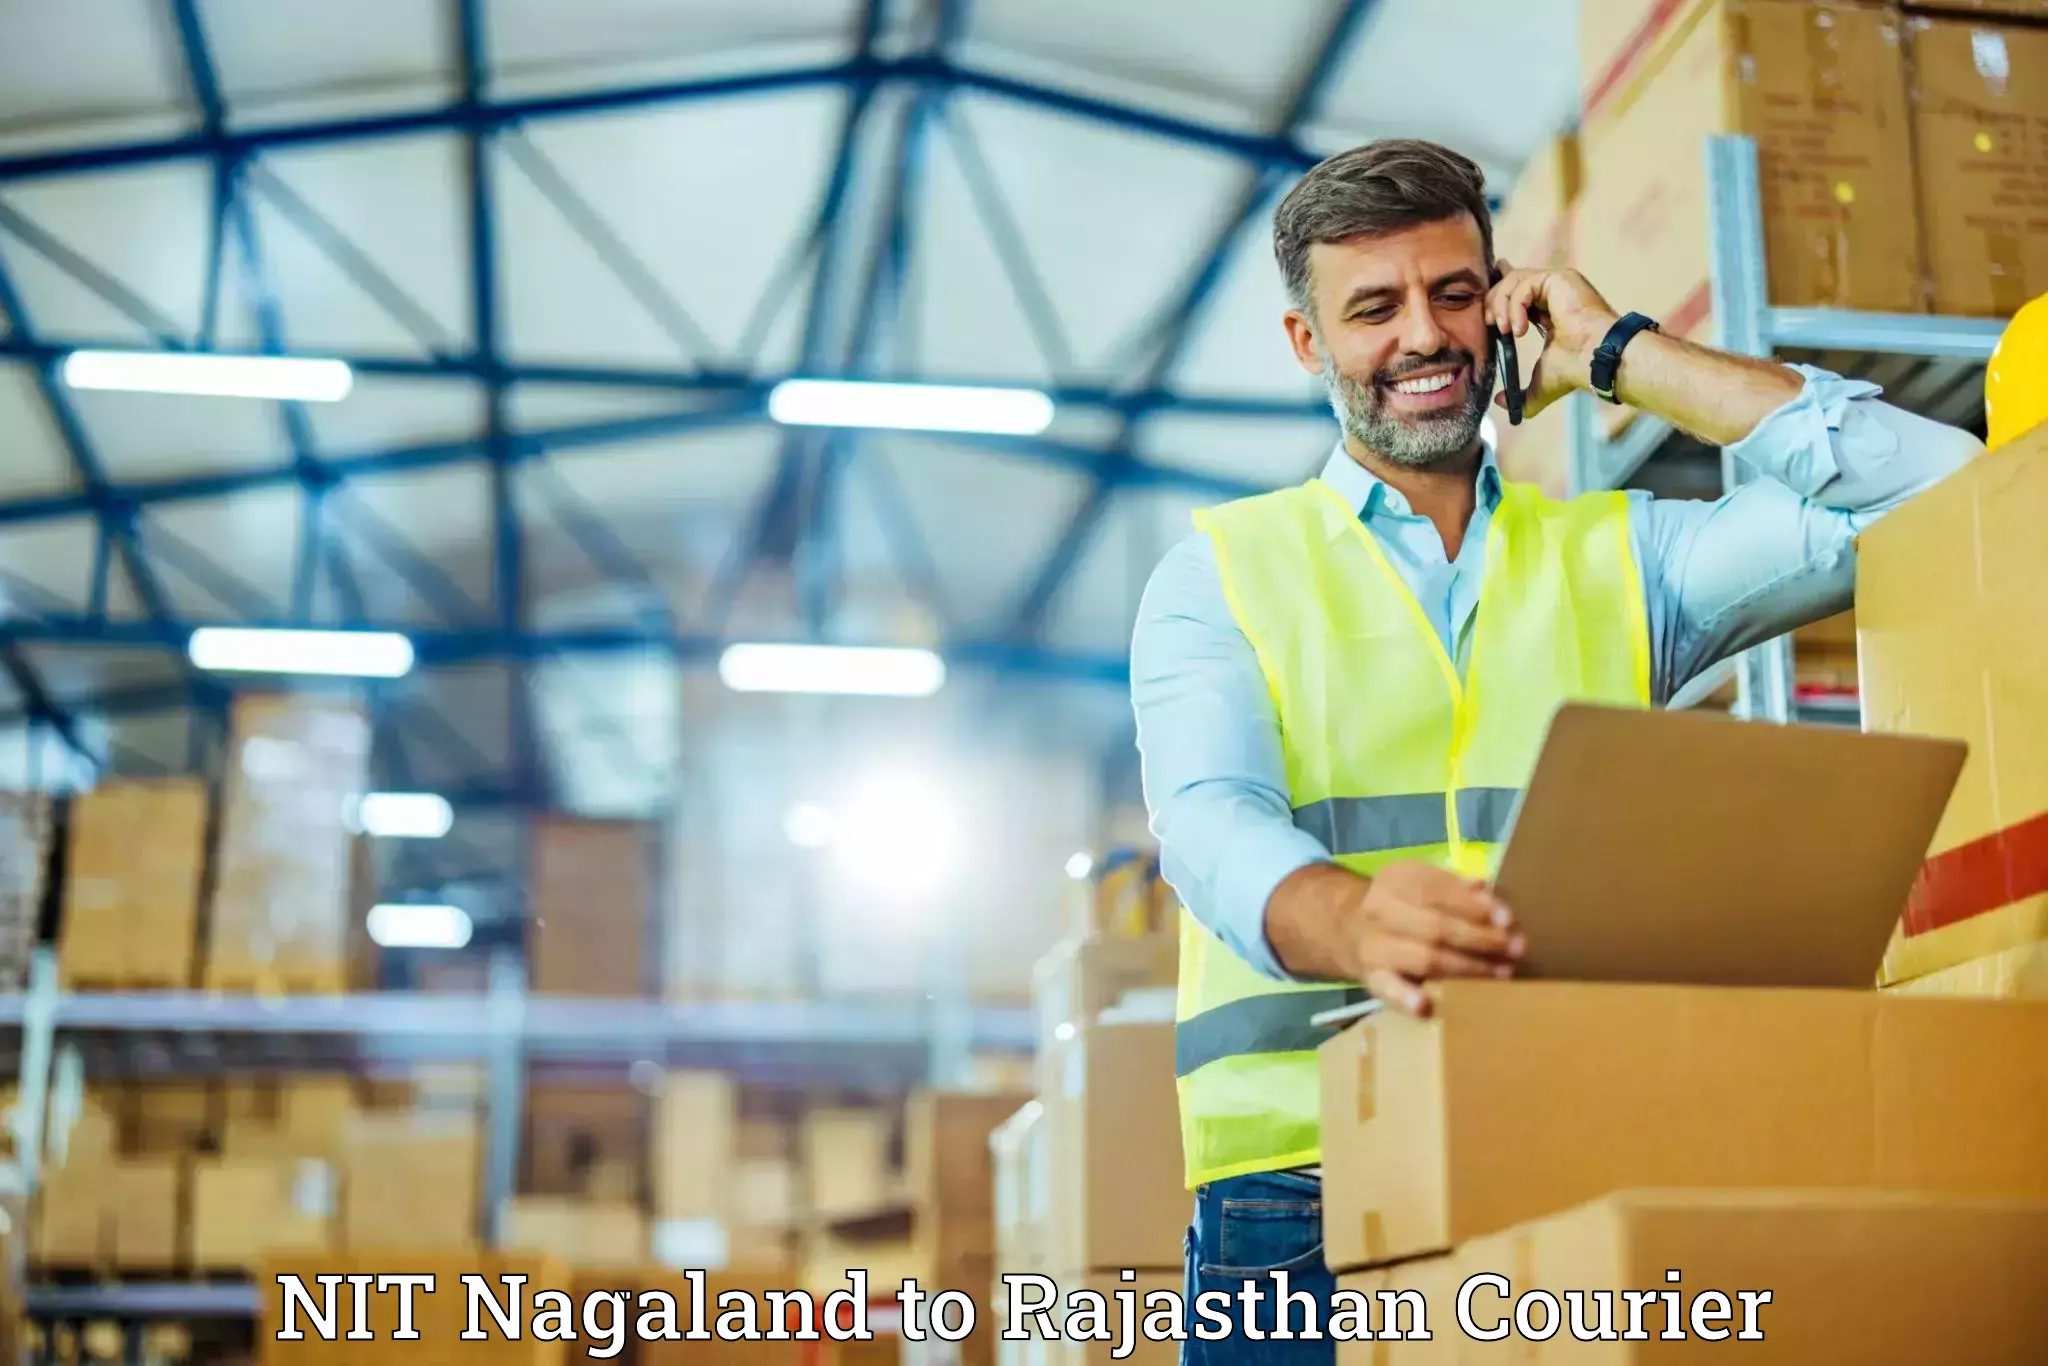 Quality relocation assistance NIT Nagaland to Rajasthan